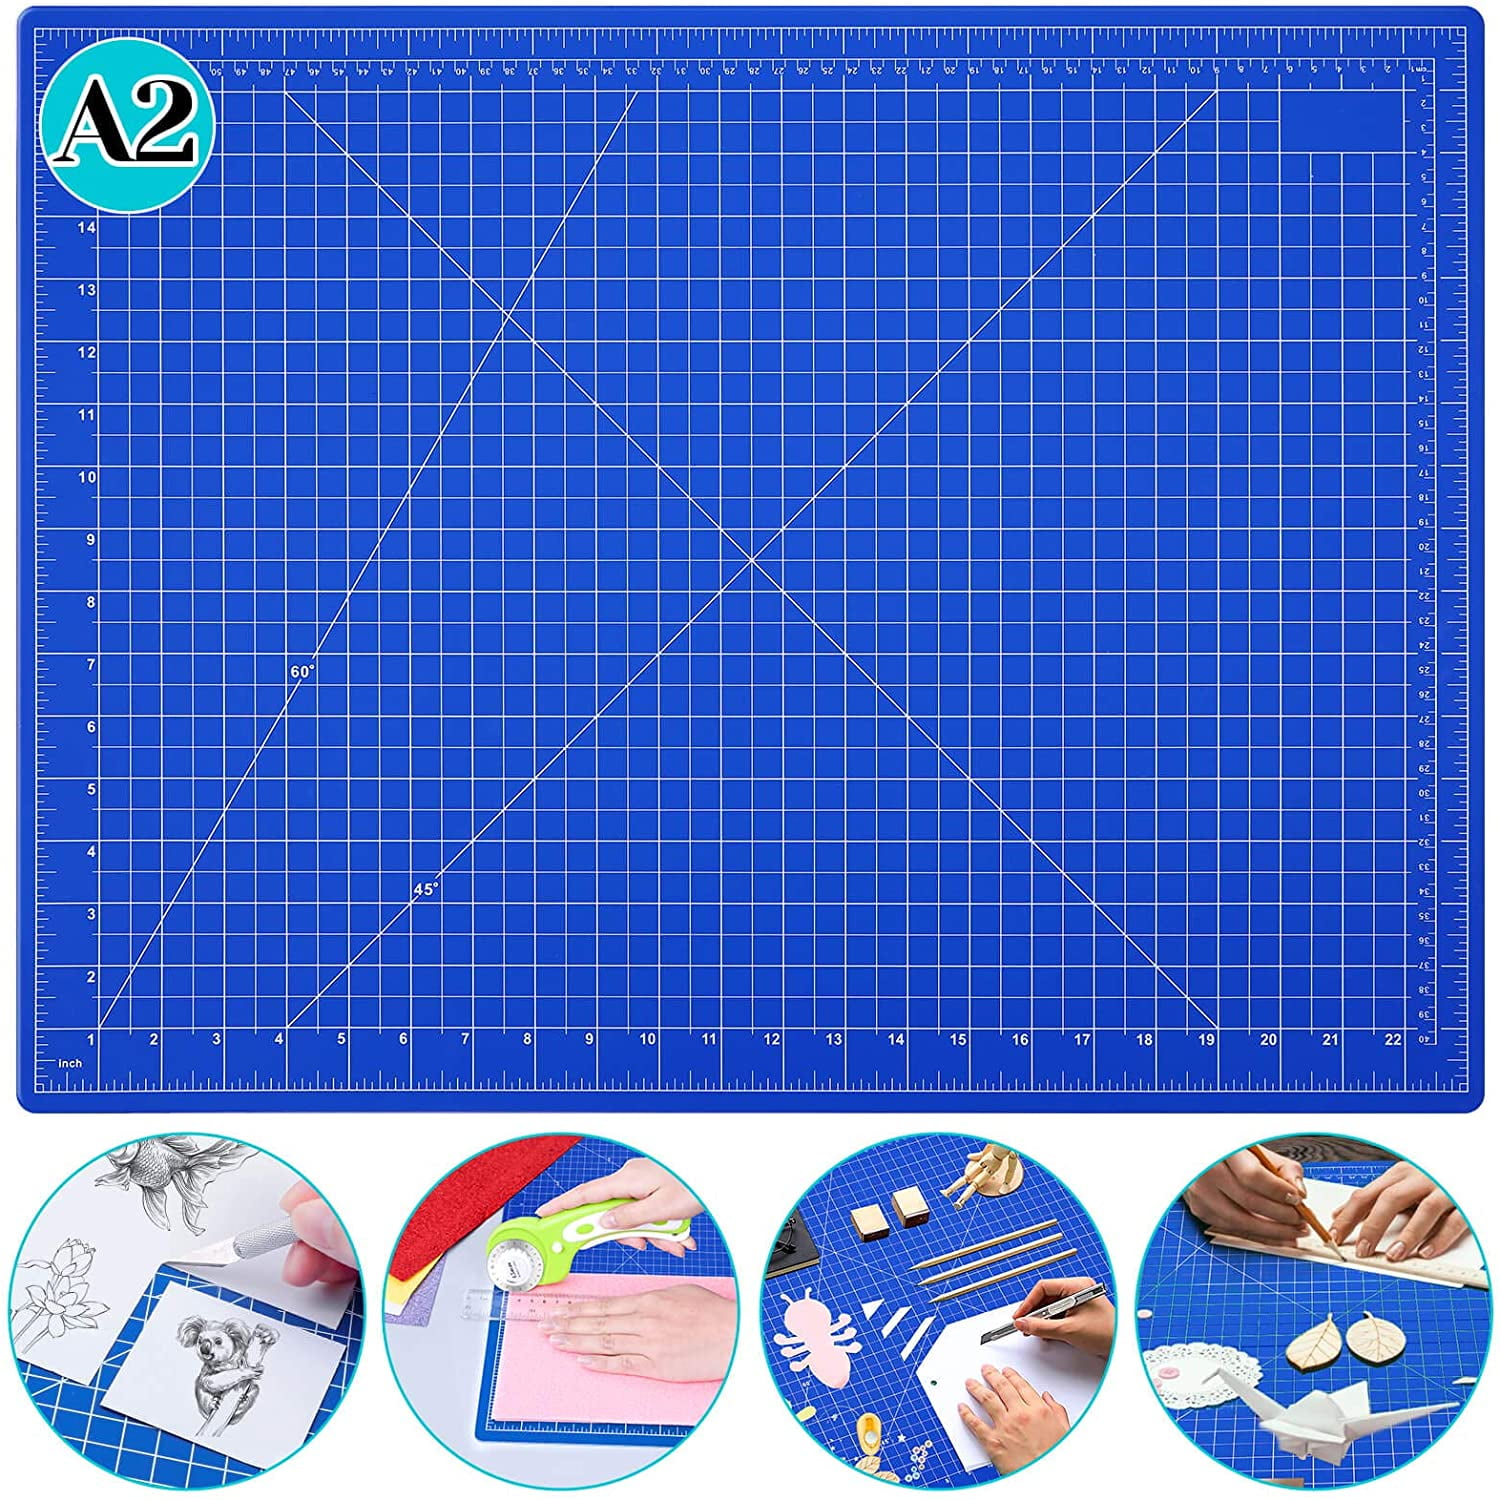 Durable Double Sided Non-Slip 3mm Thick Professional Gridded Rotary Mat for Quilting Sewing Scrapbooks Gunpla Crafty World Blue 12 x 18 Self Healing Cutting Mat and All Arts & Crafts Projects 